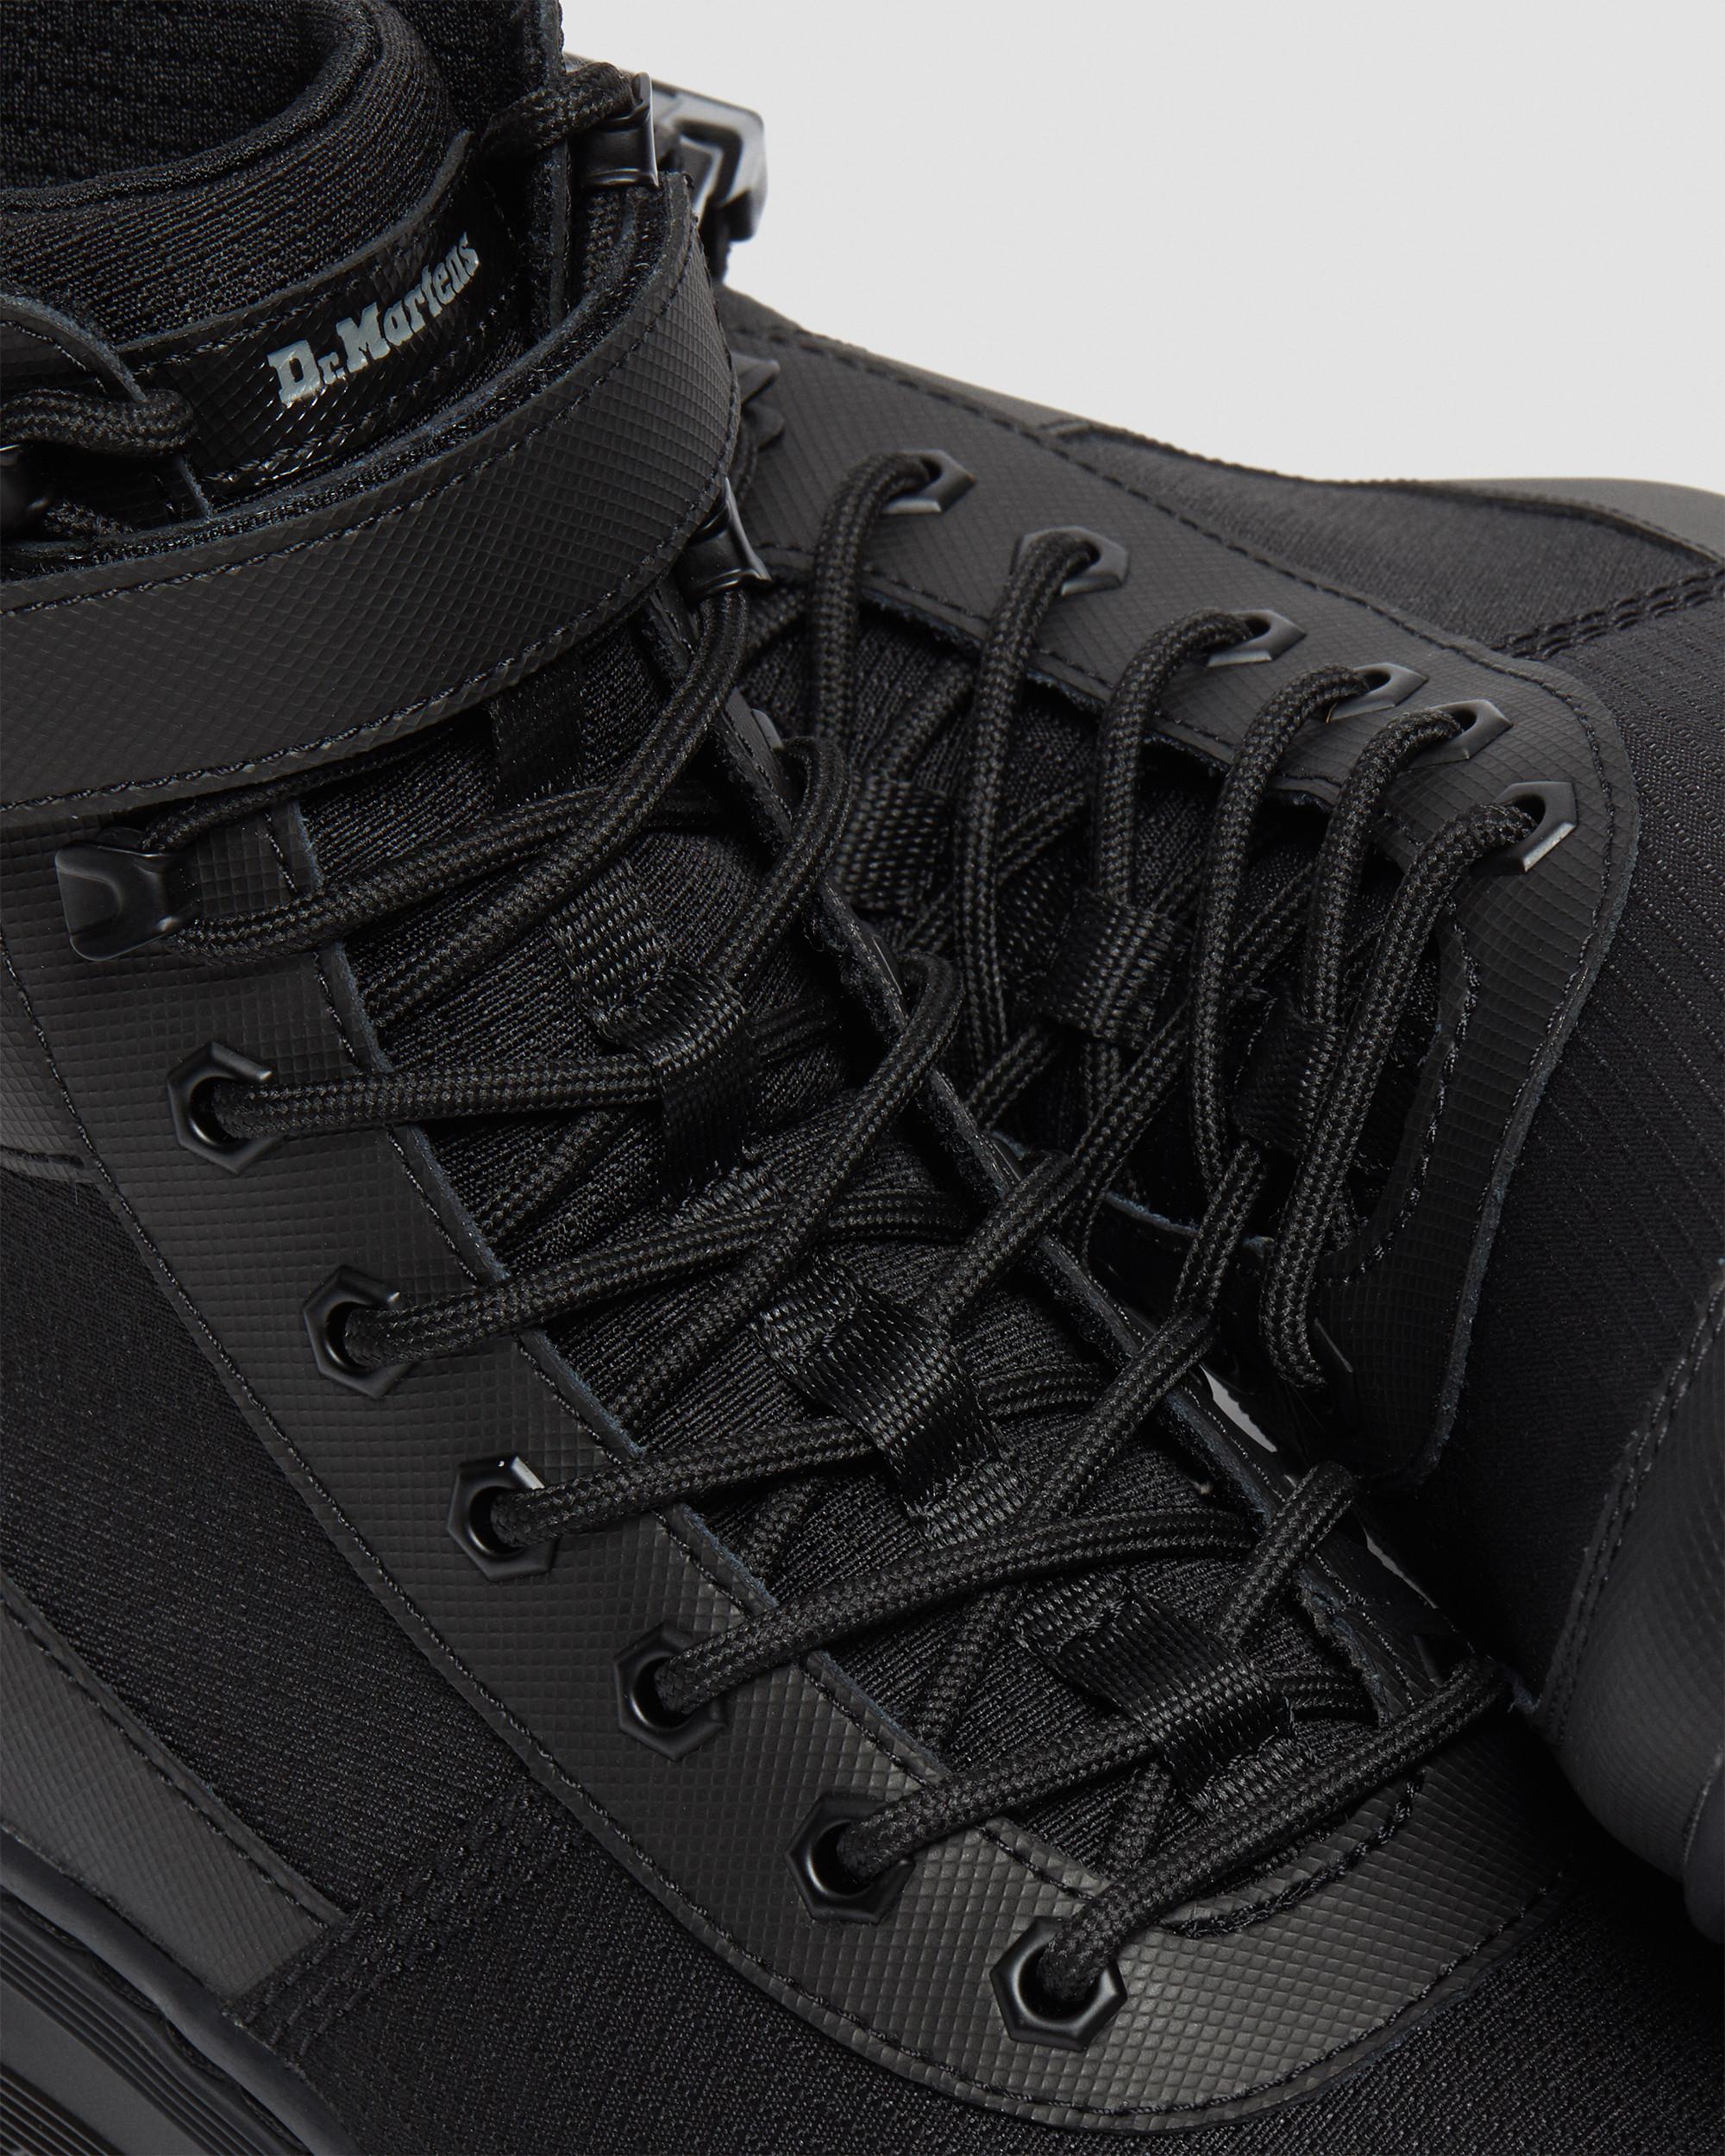 Combs Tech Poly Utility Boots in Black